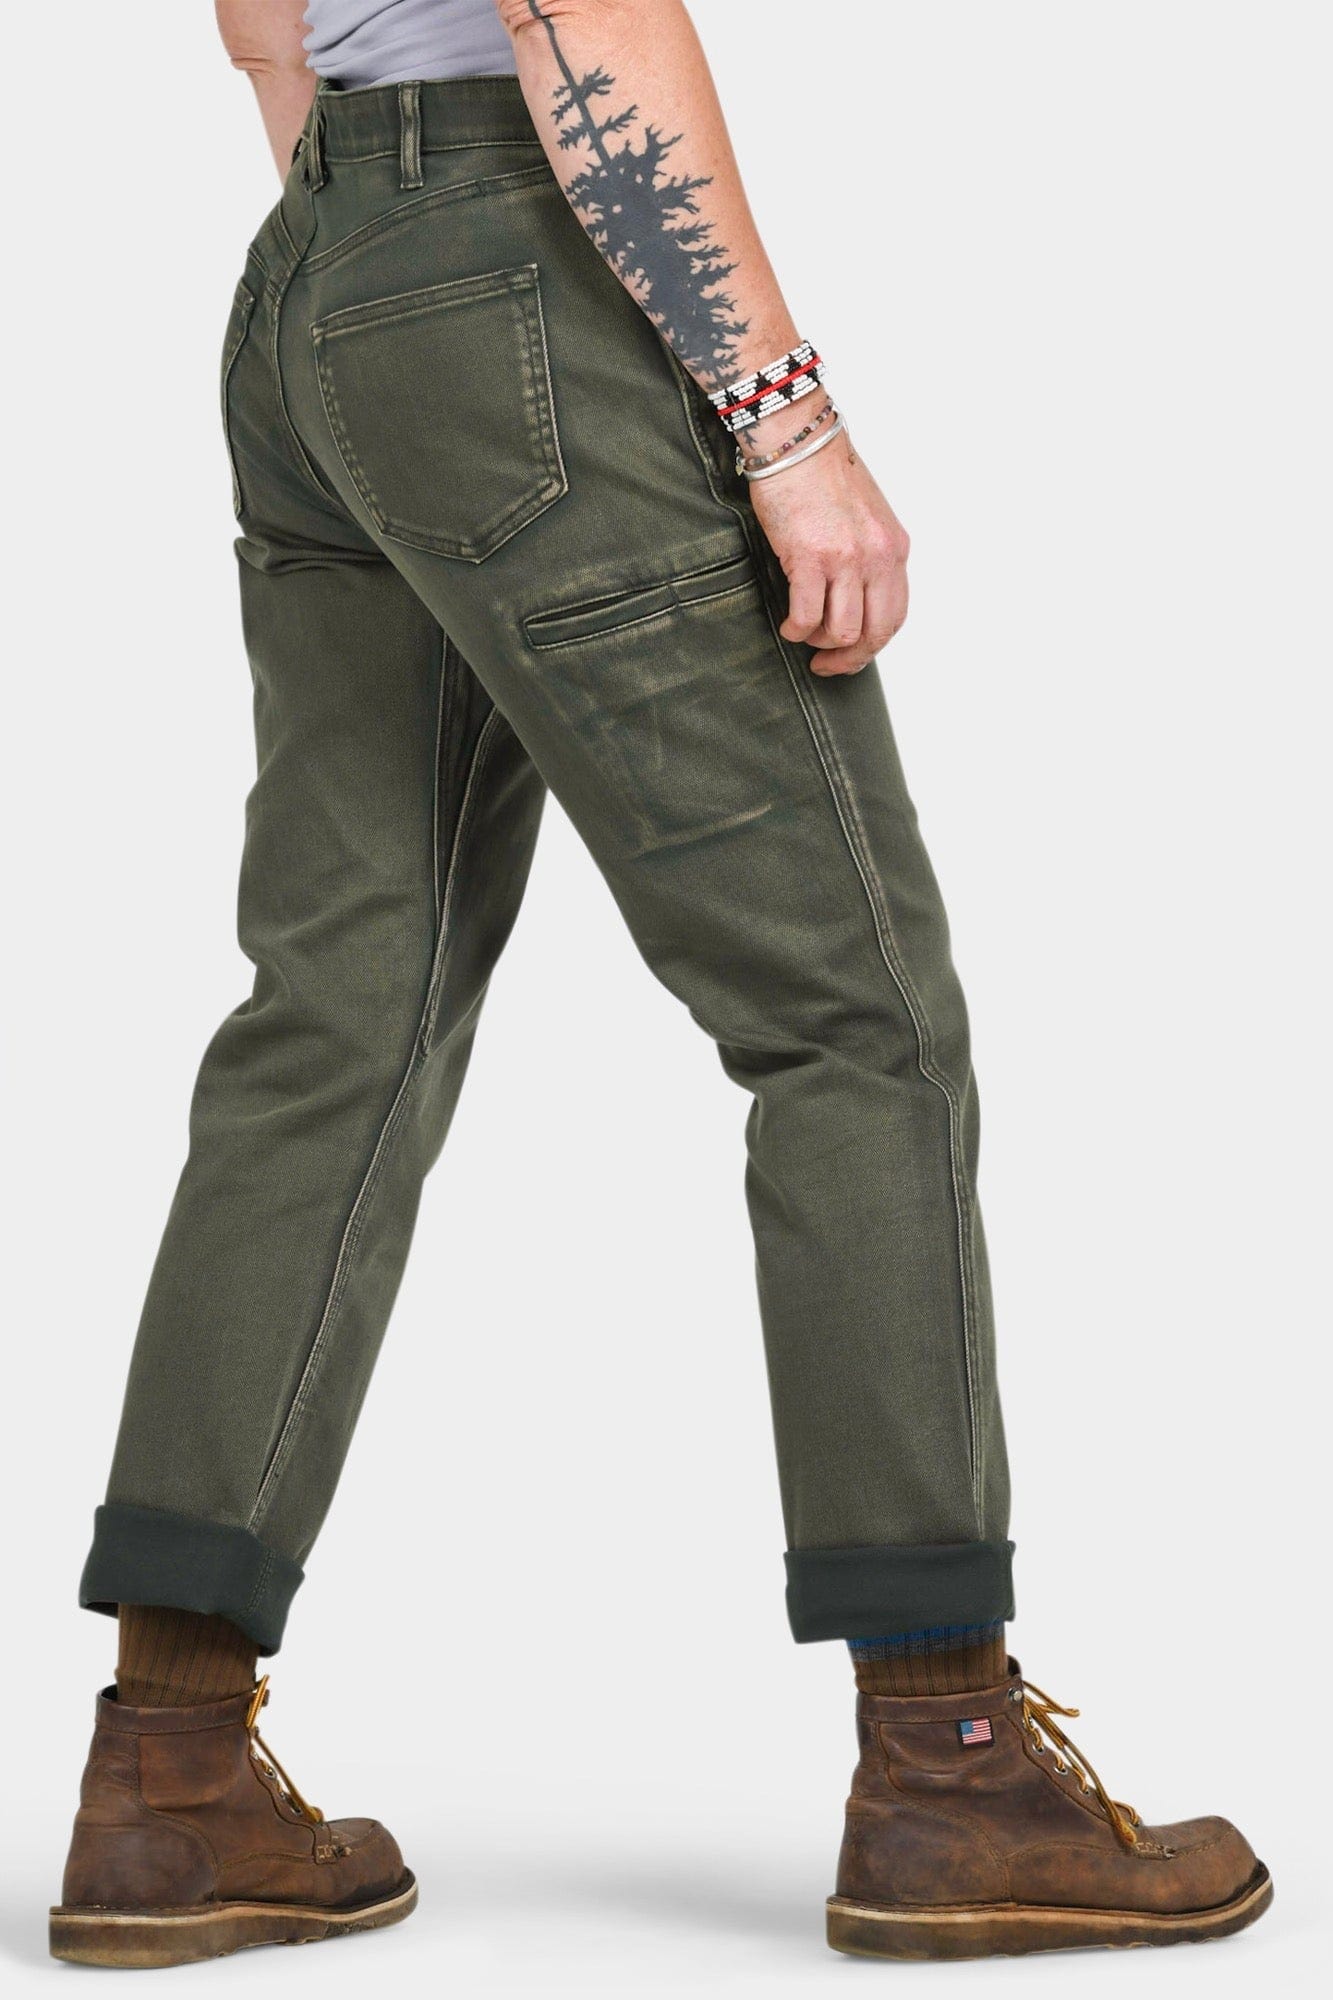 Shop Pant in Olive Green Denim Work Pants Dovetail Workwear